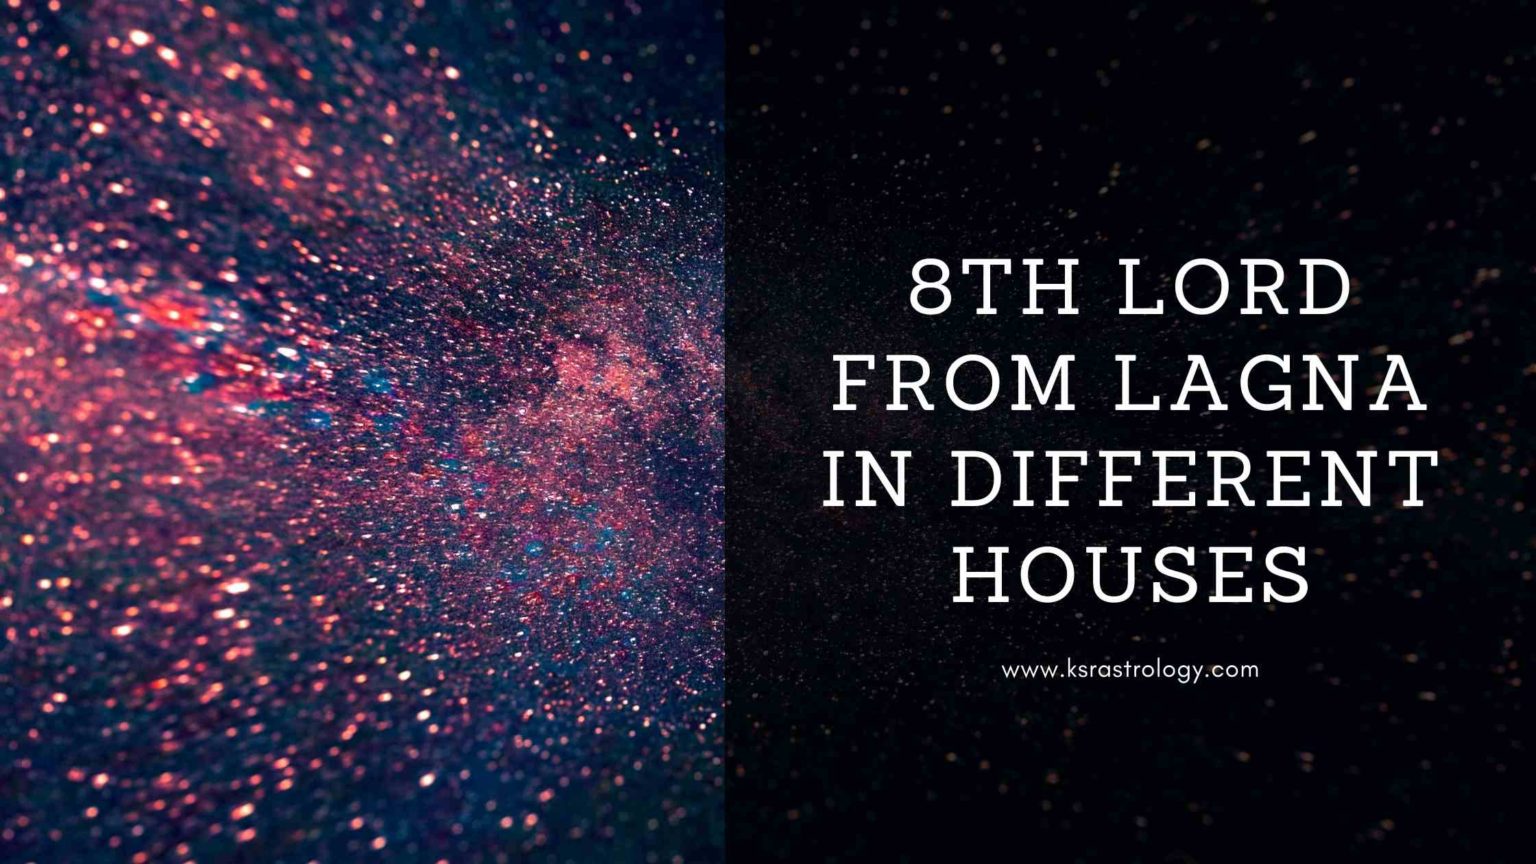 5th lord in 7th house in astrology